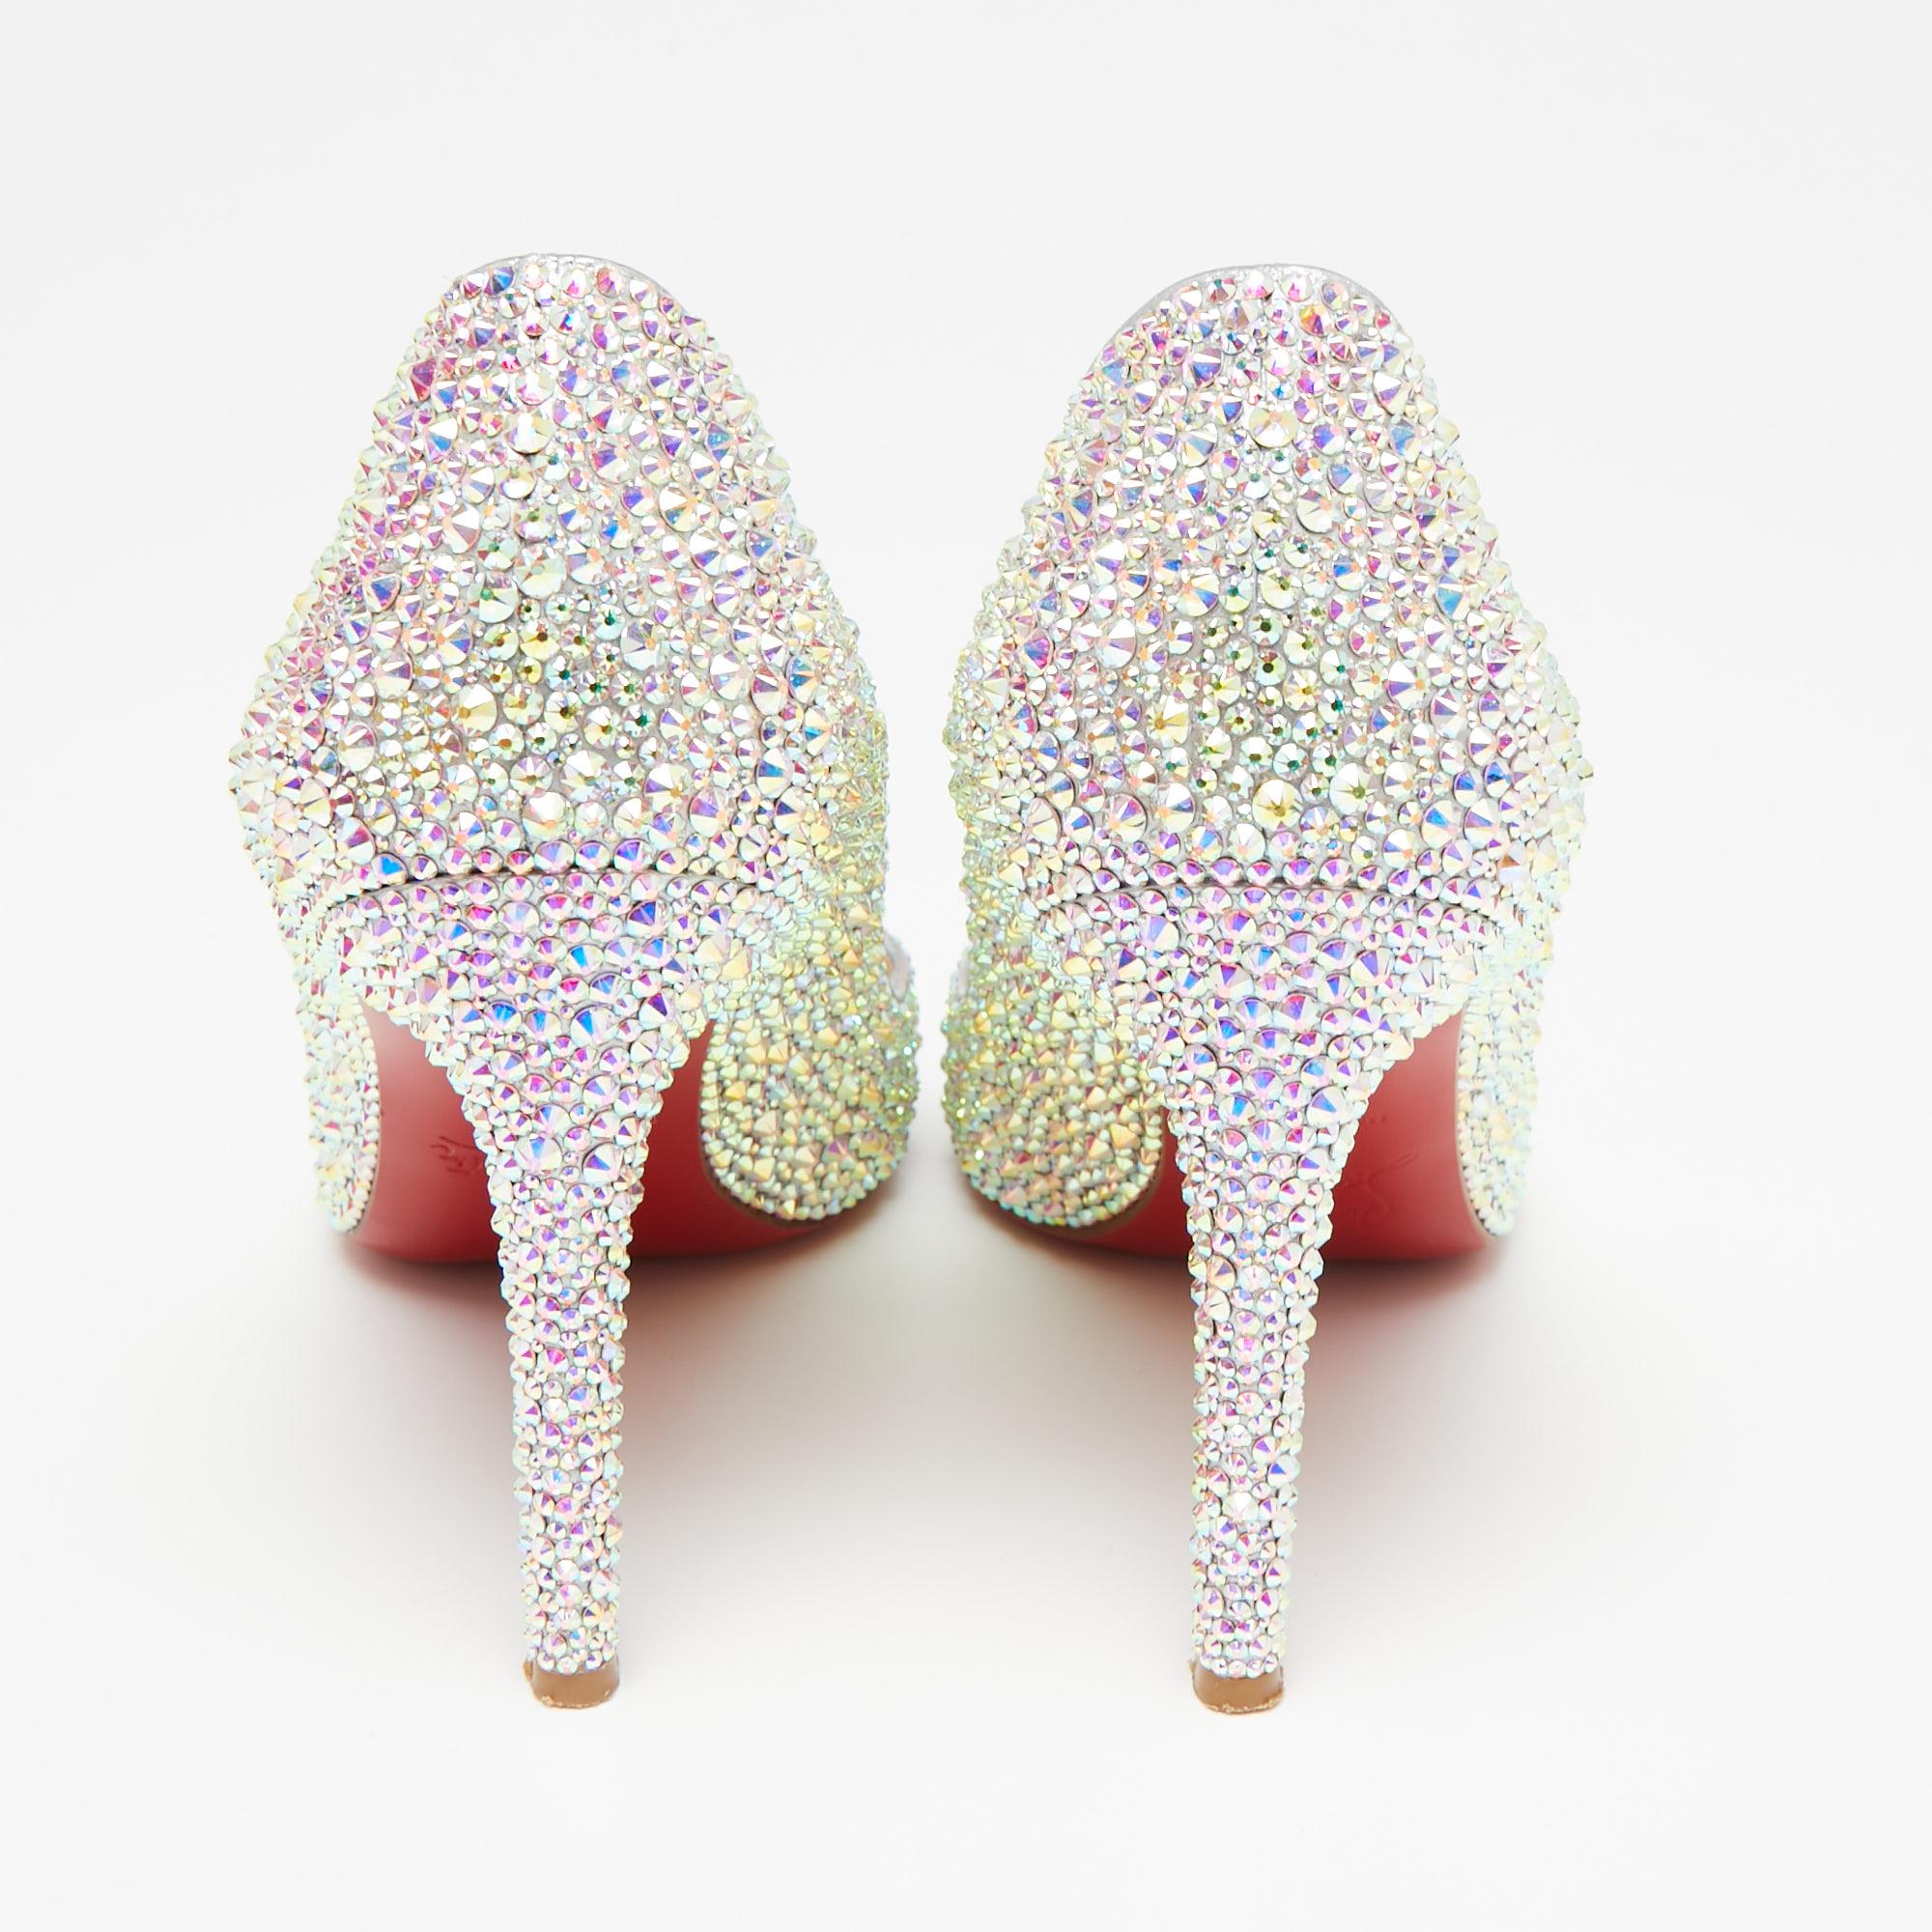 Beige Christian Louboutin Multicolor Leather Pigalle Strass Degrade Pumps Size 36